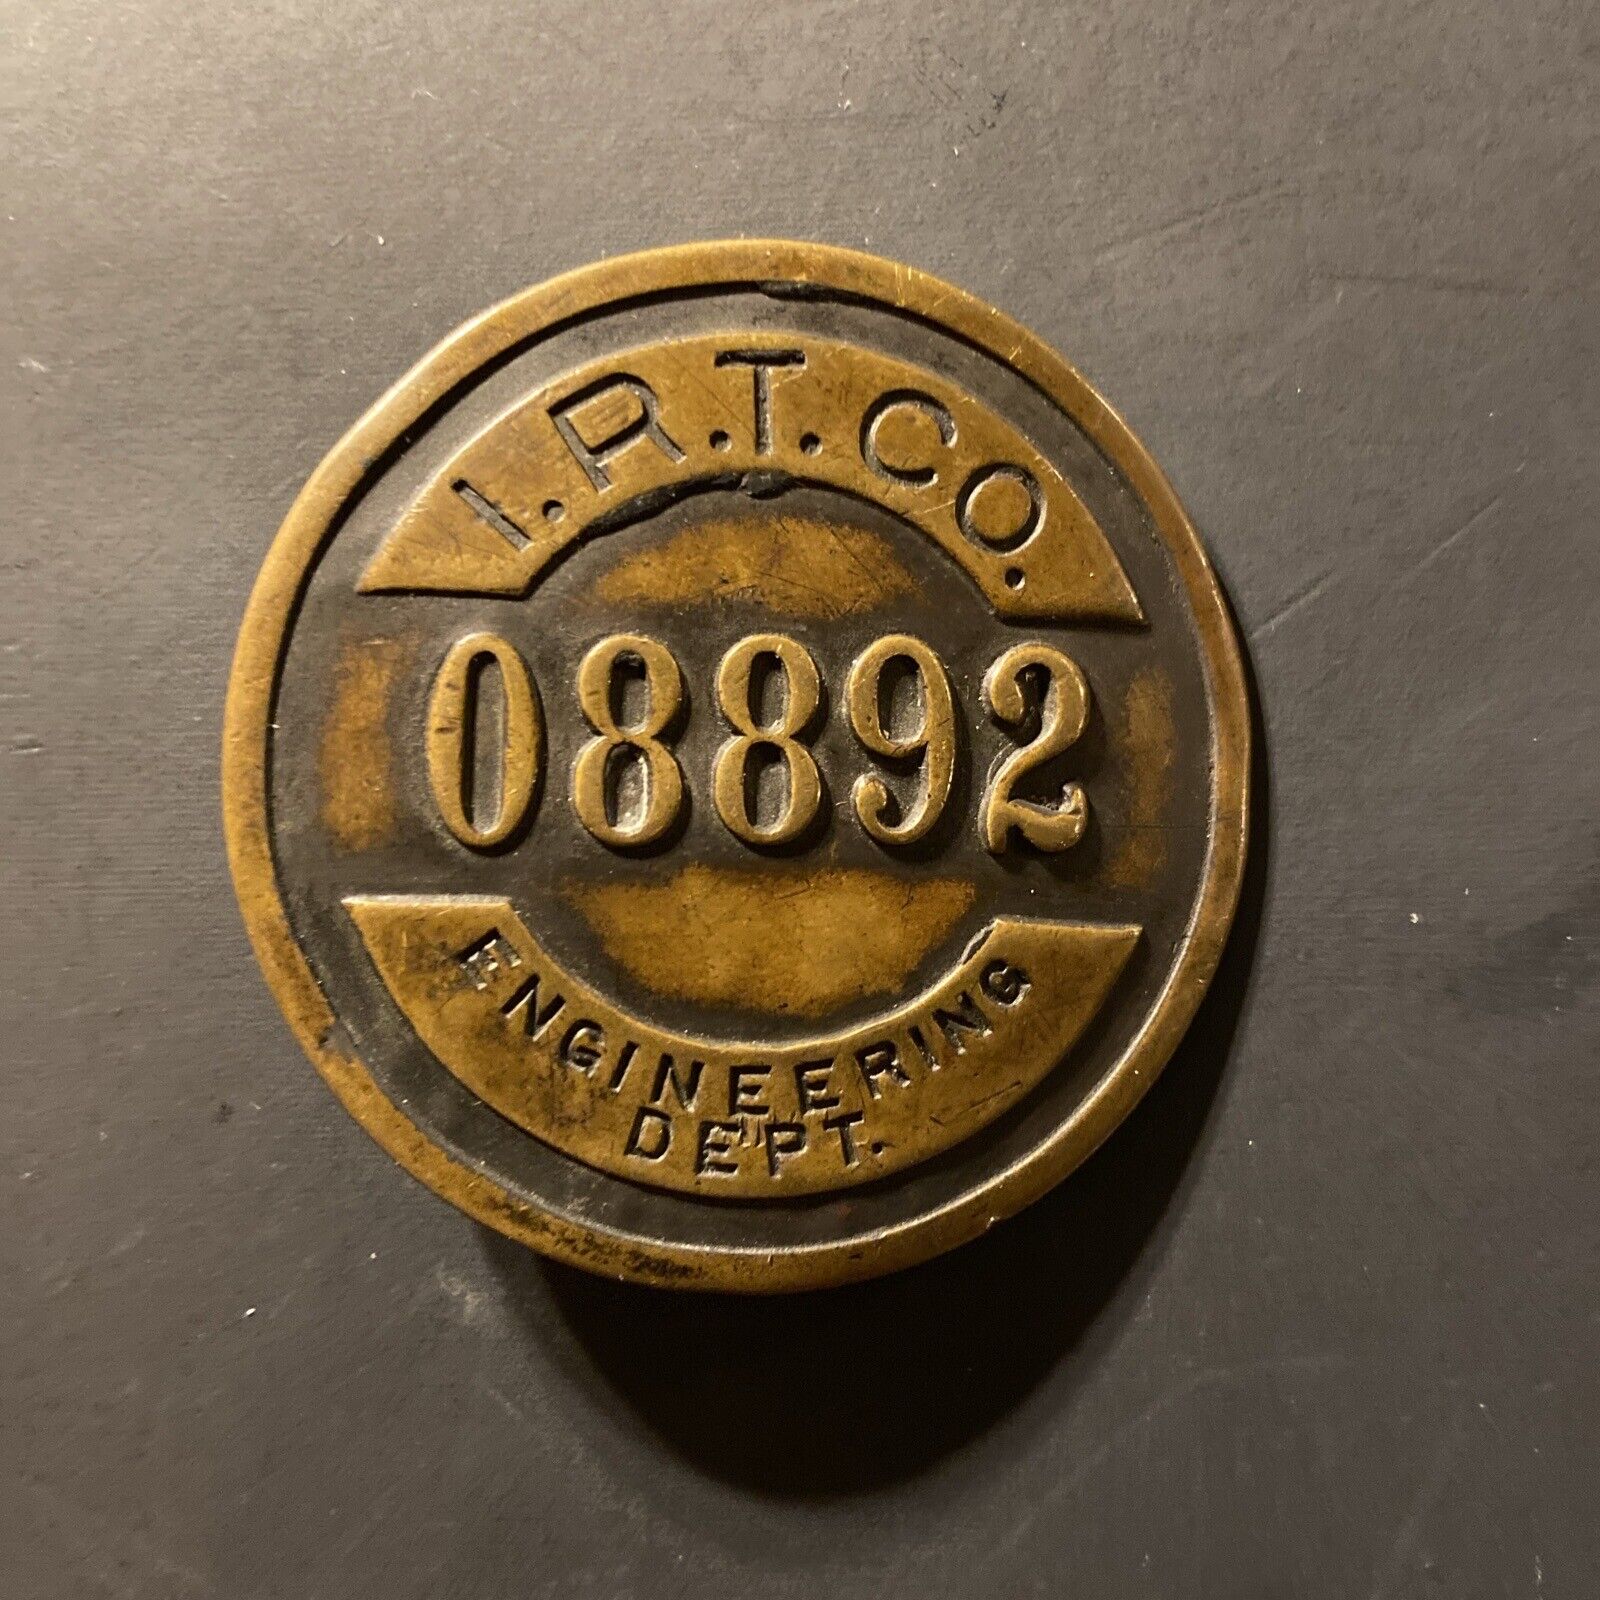 Nice Collectible Badge. I. R.T CO. Engineering Department Number 08892, Round